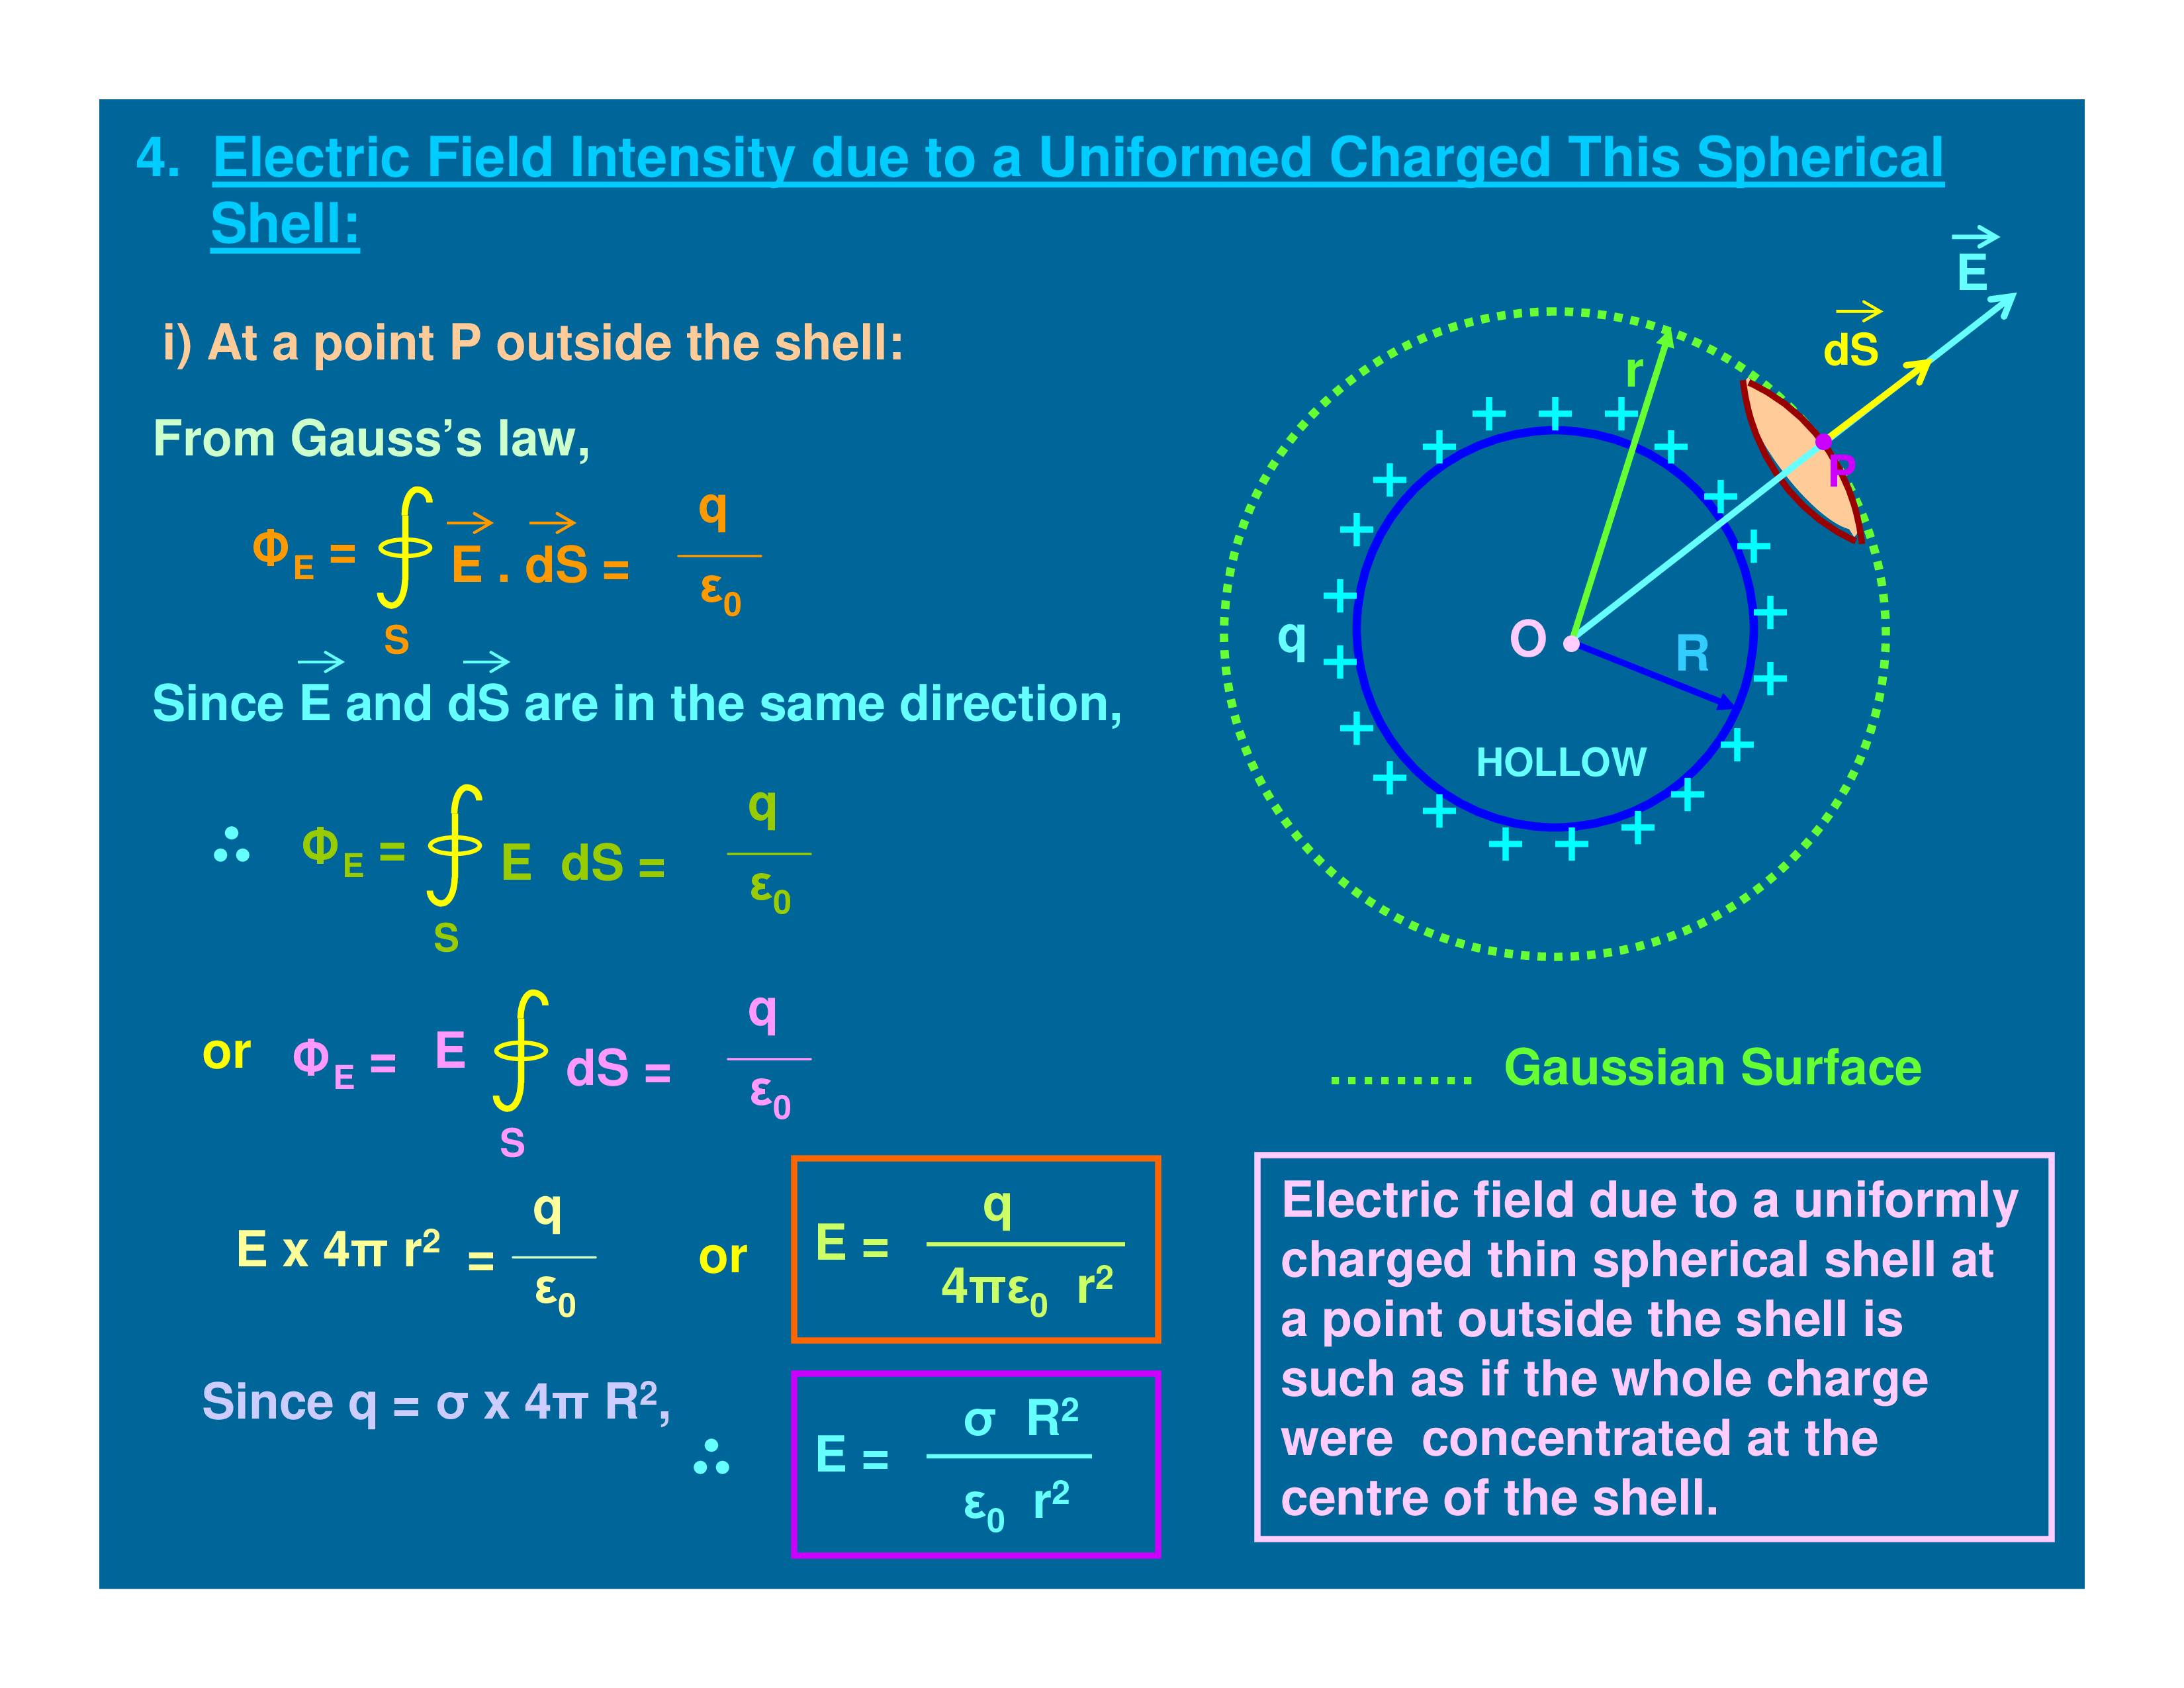 math intensity equation of light at surface